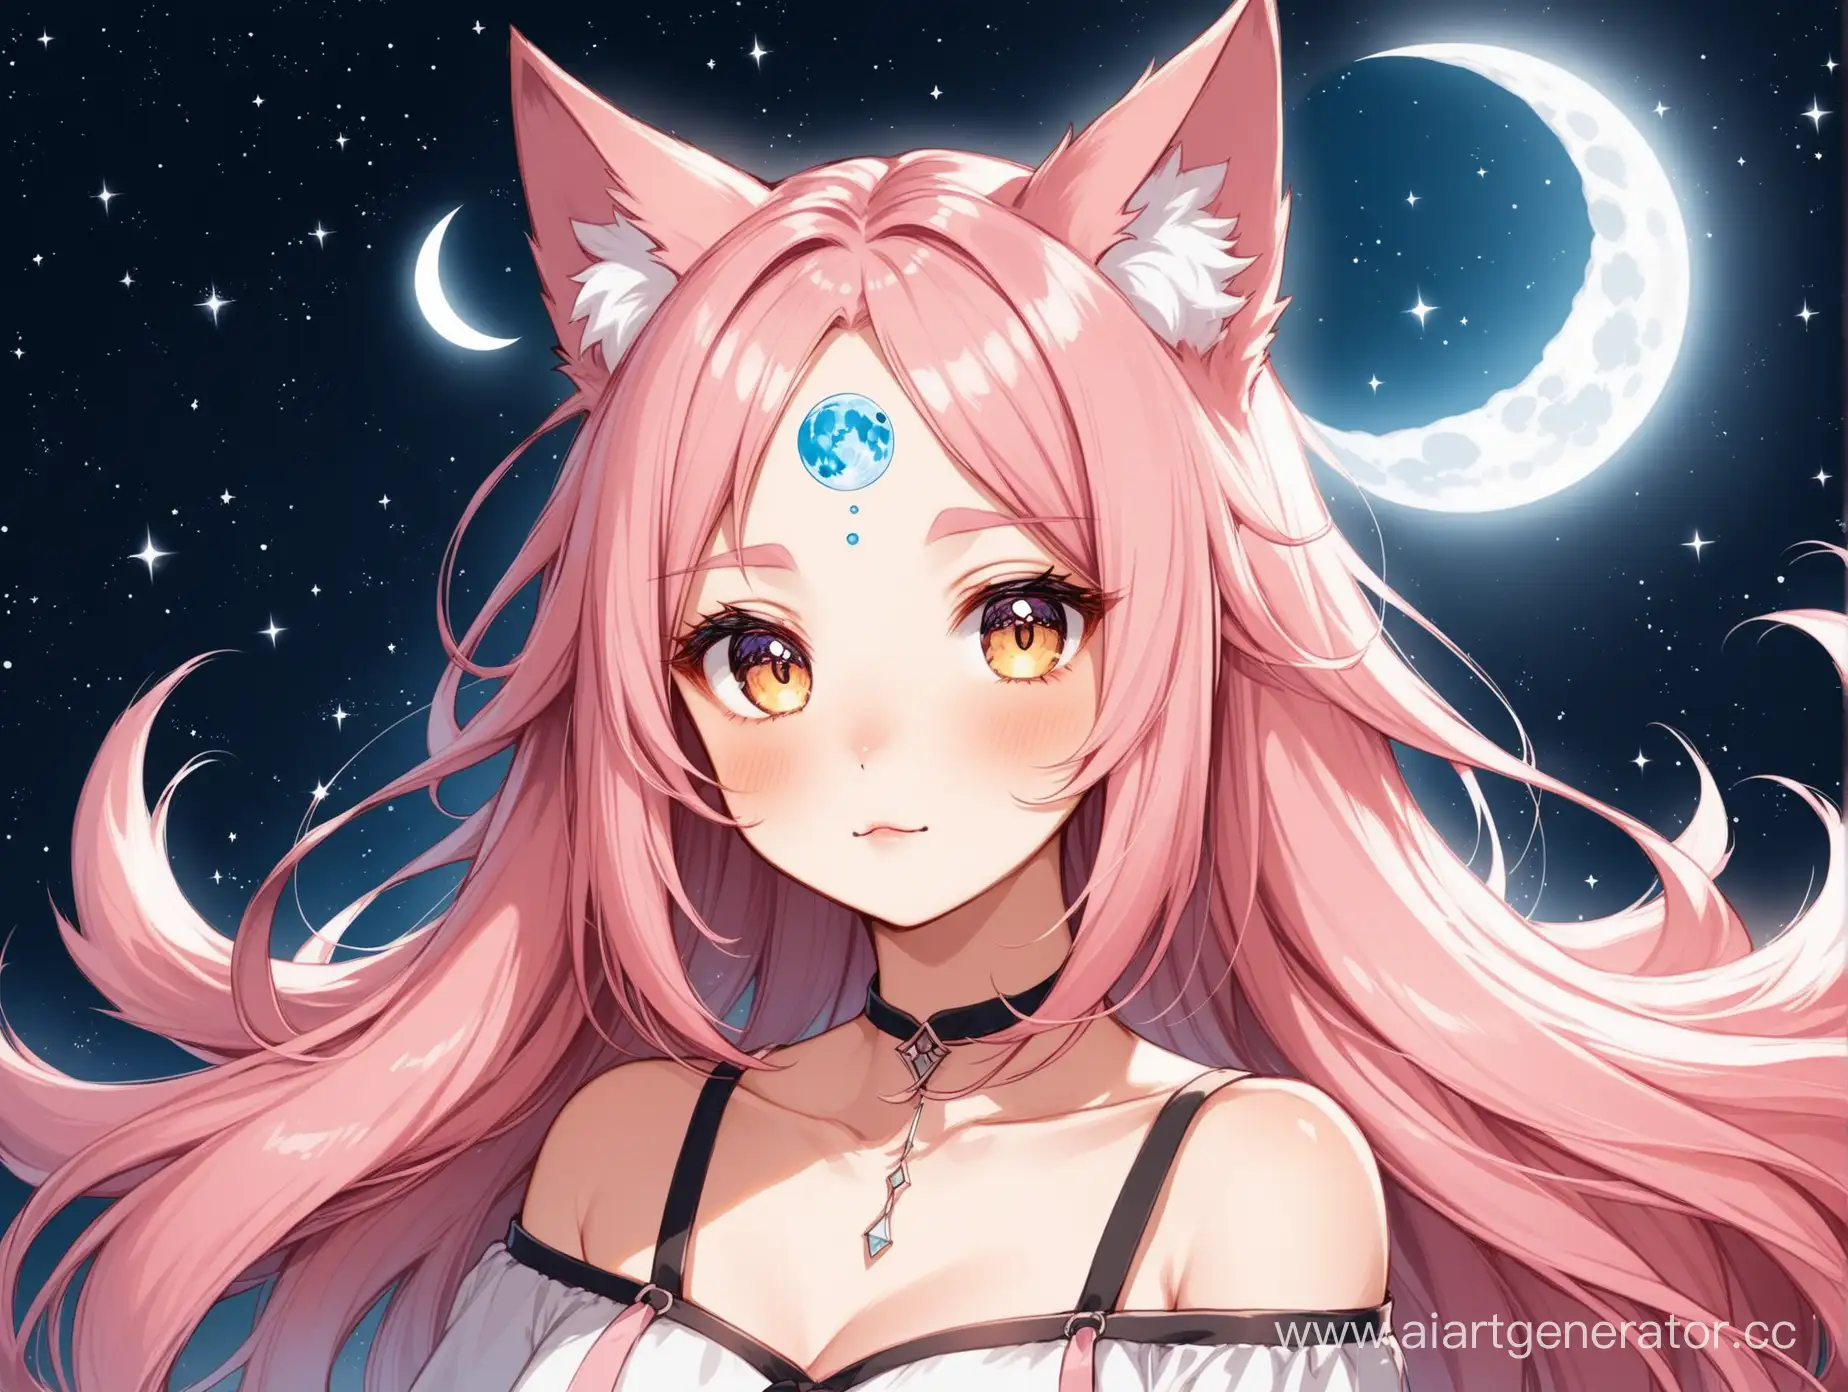 Enchanting-Fox-Girl-with-AshPink-Hair-and-Celestial-Markings